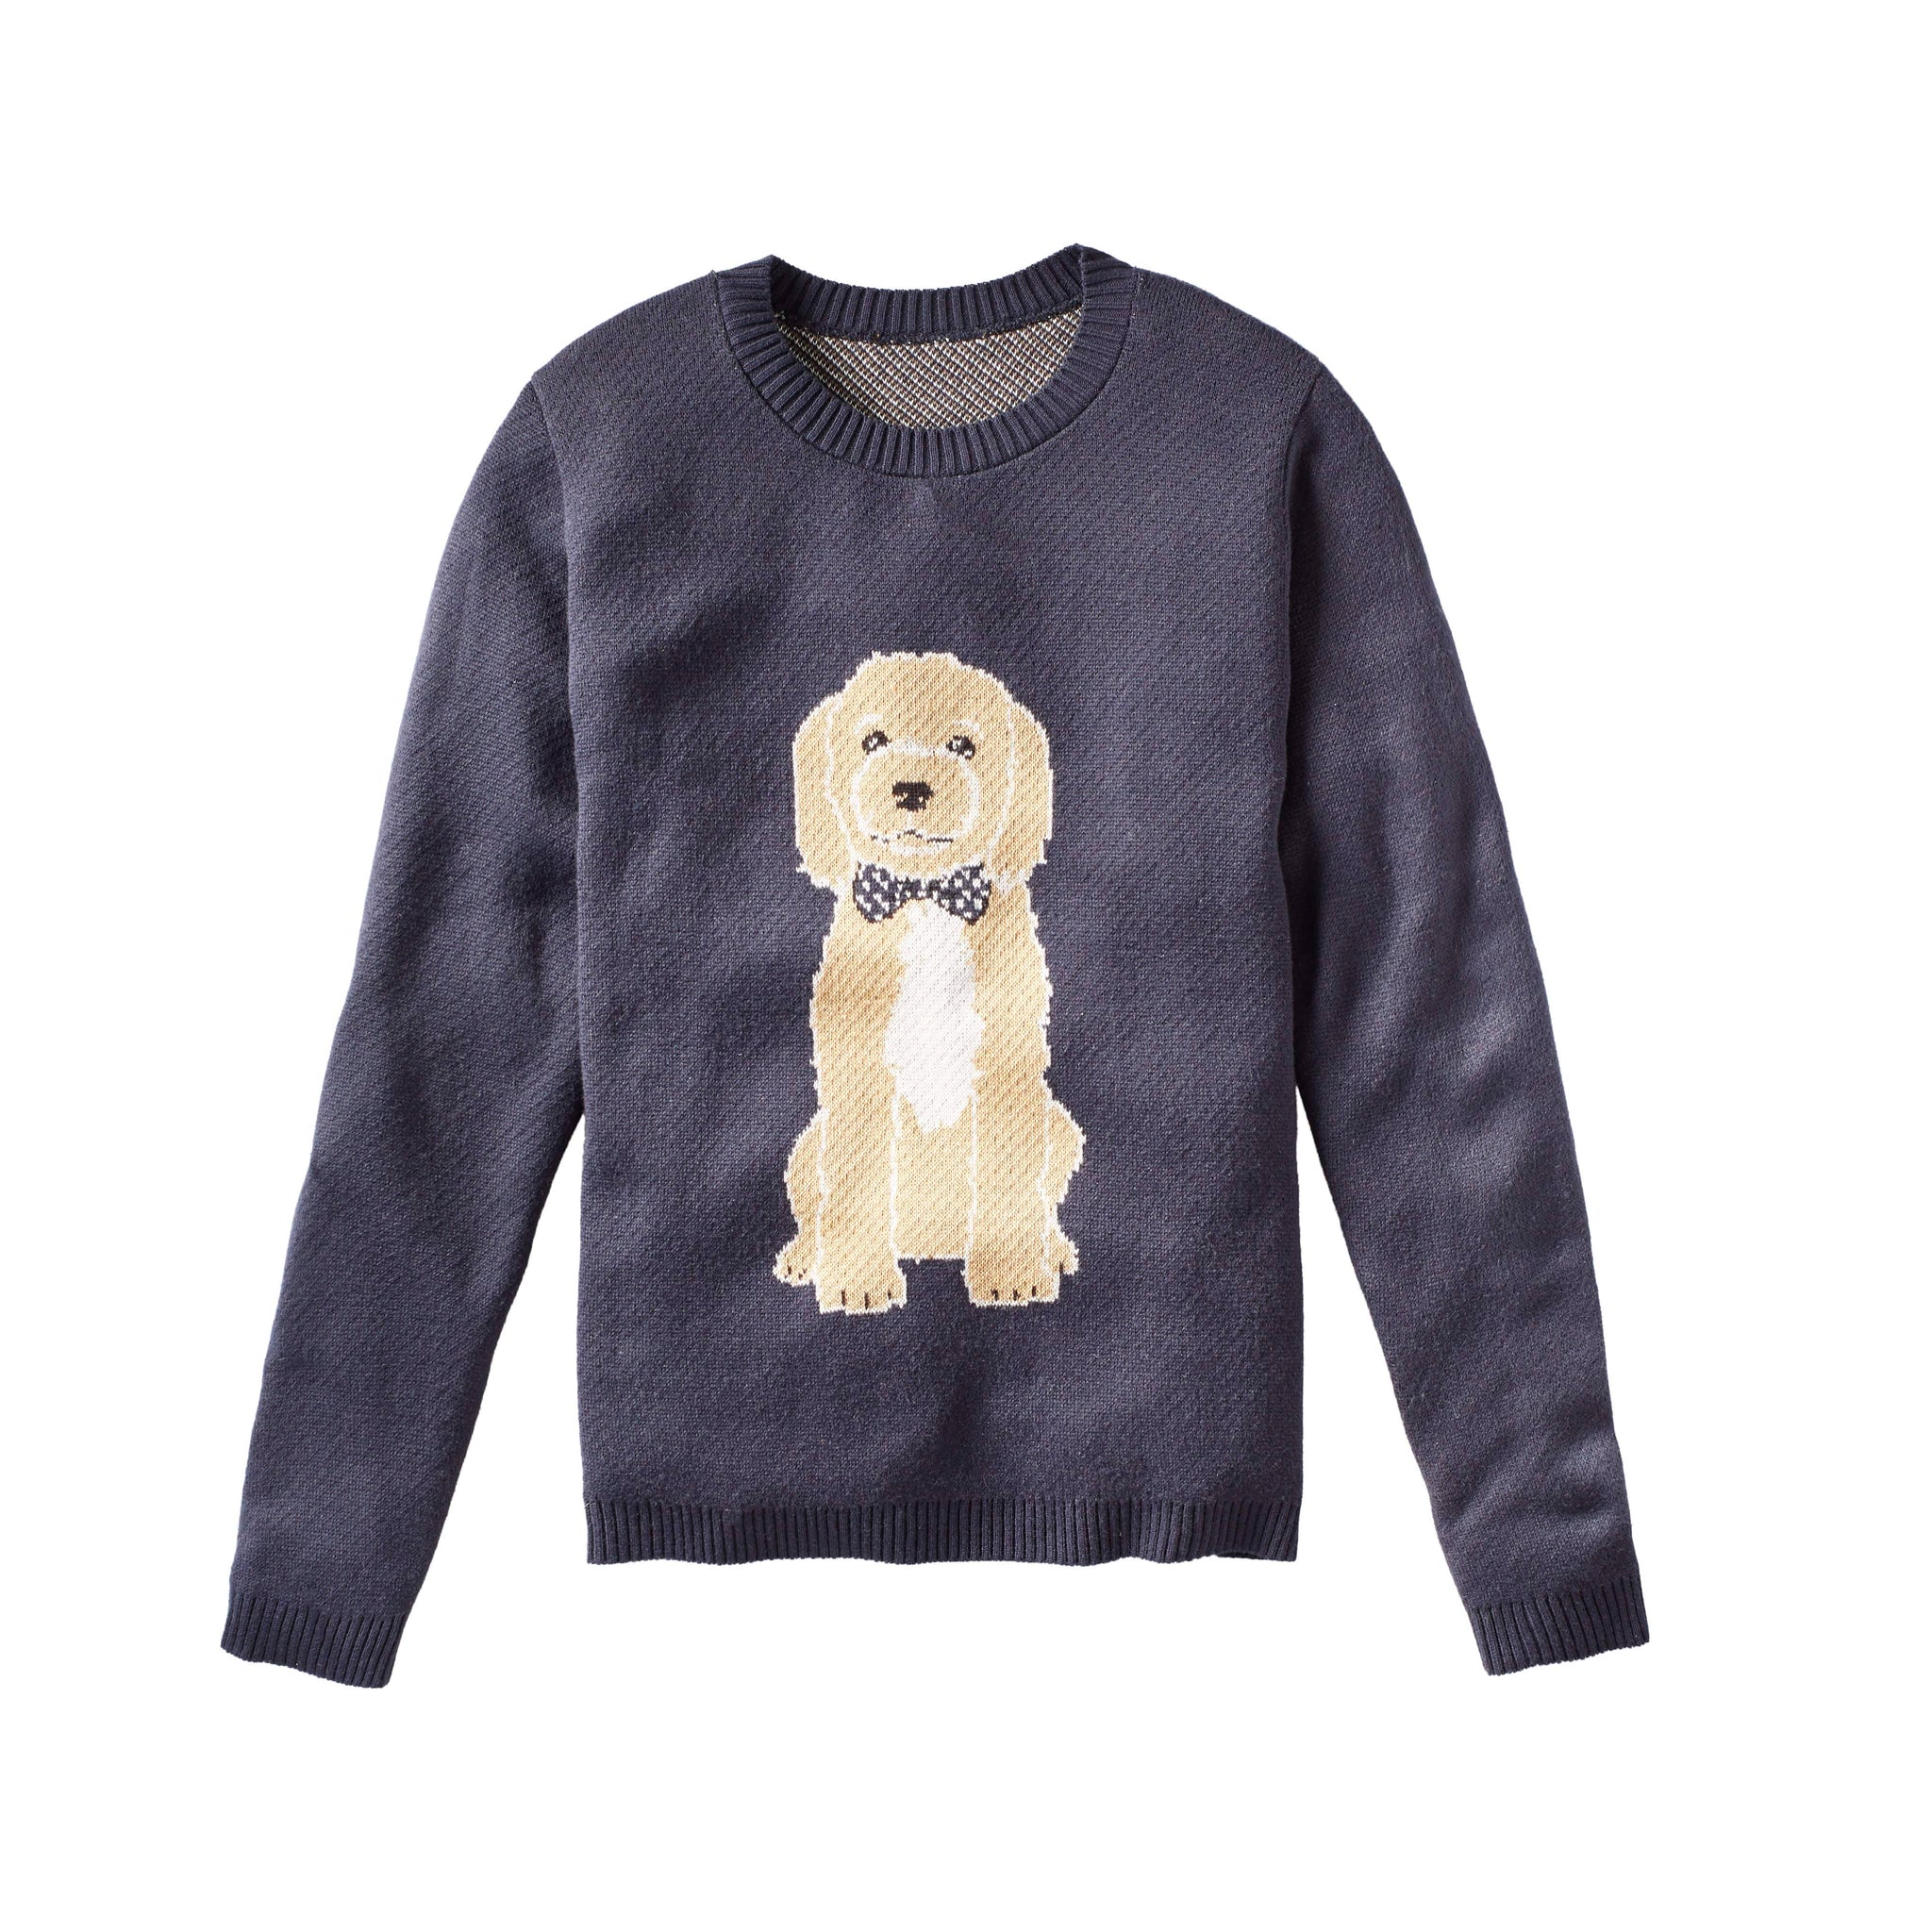 Dog With Bow Tie - Custom Knitted Sweater – Sweater Hound